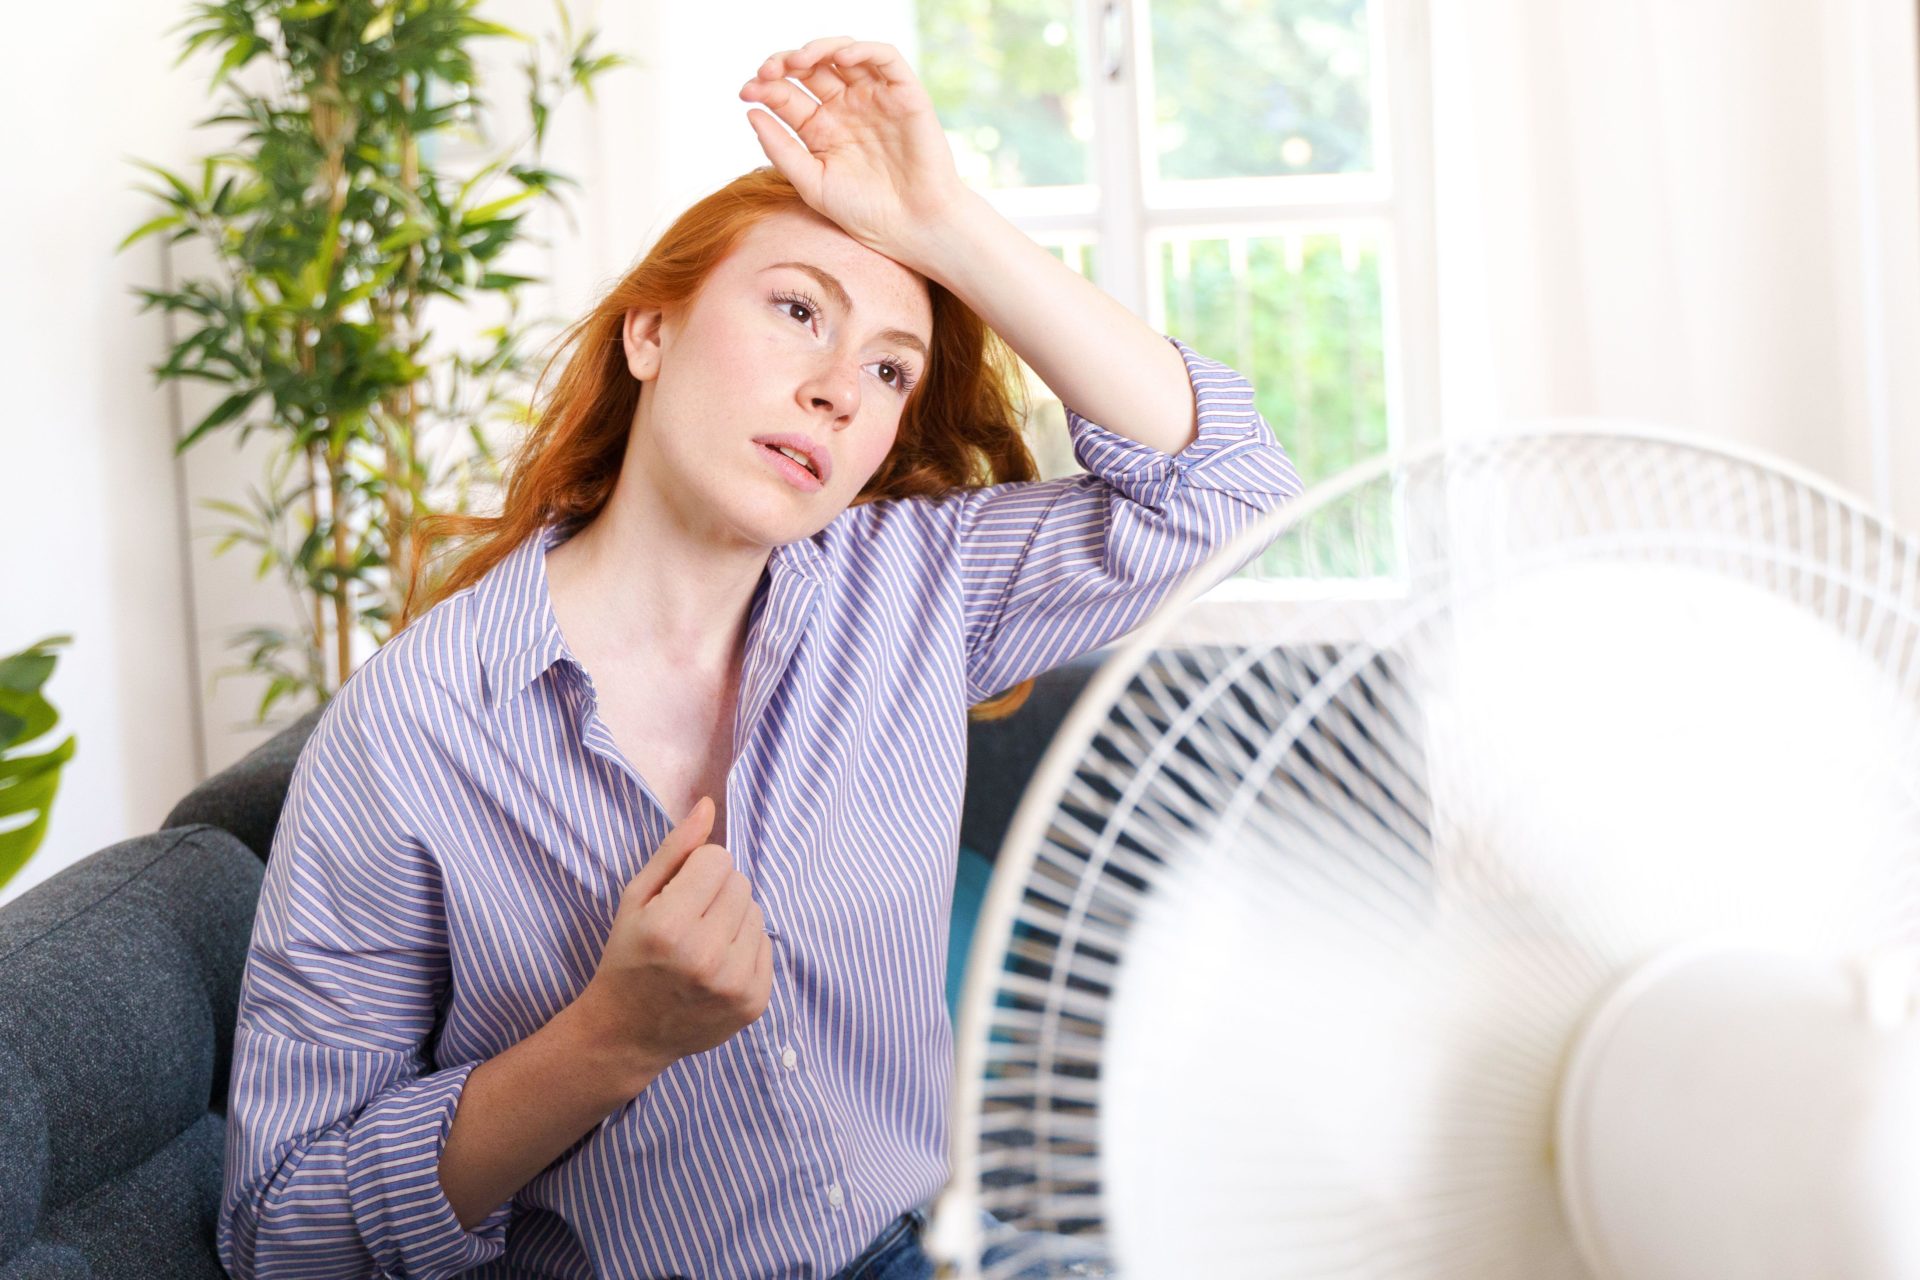 One woman suffers from heat in the summer season